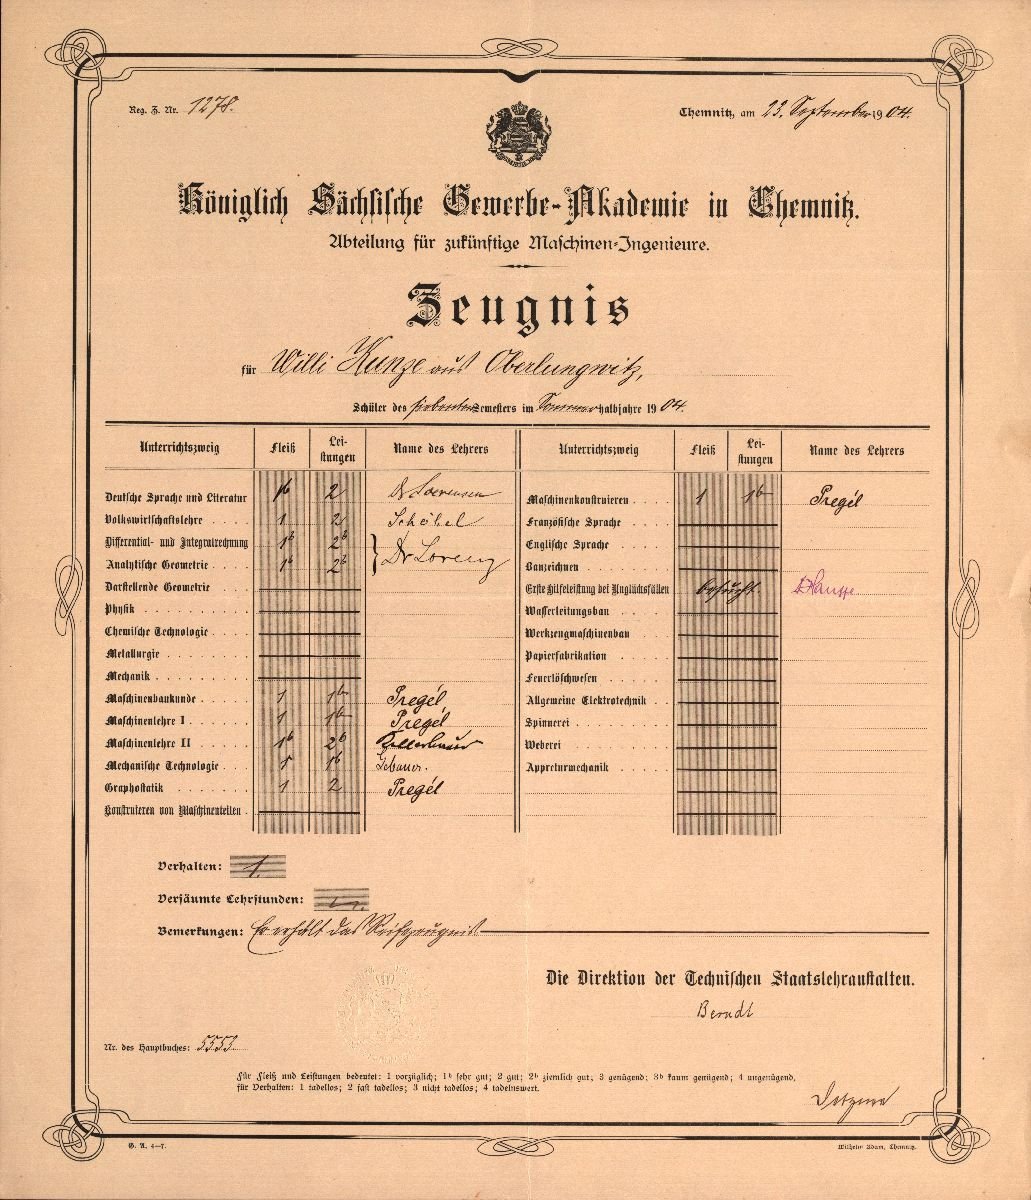 Certificate of the Royal Mercantile College in Chemnitz for the student Willi Kunze in his 7th term, 1904